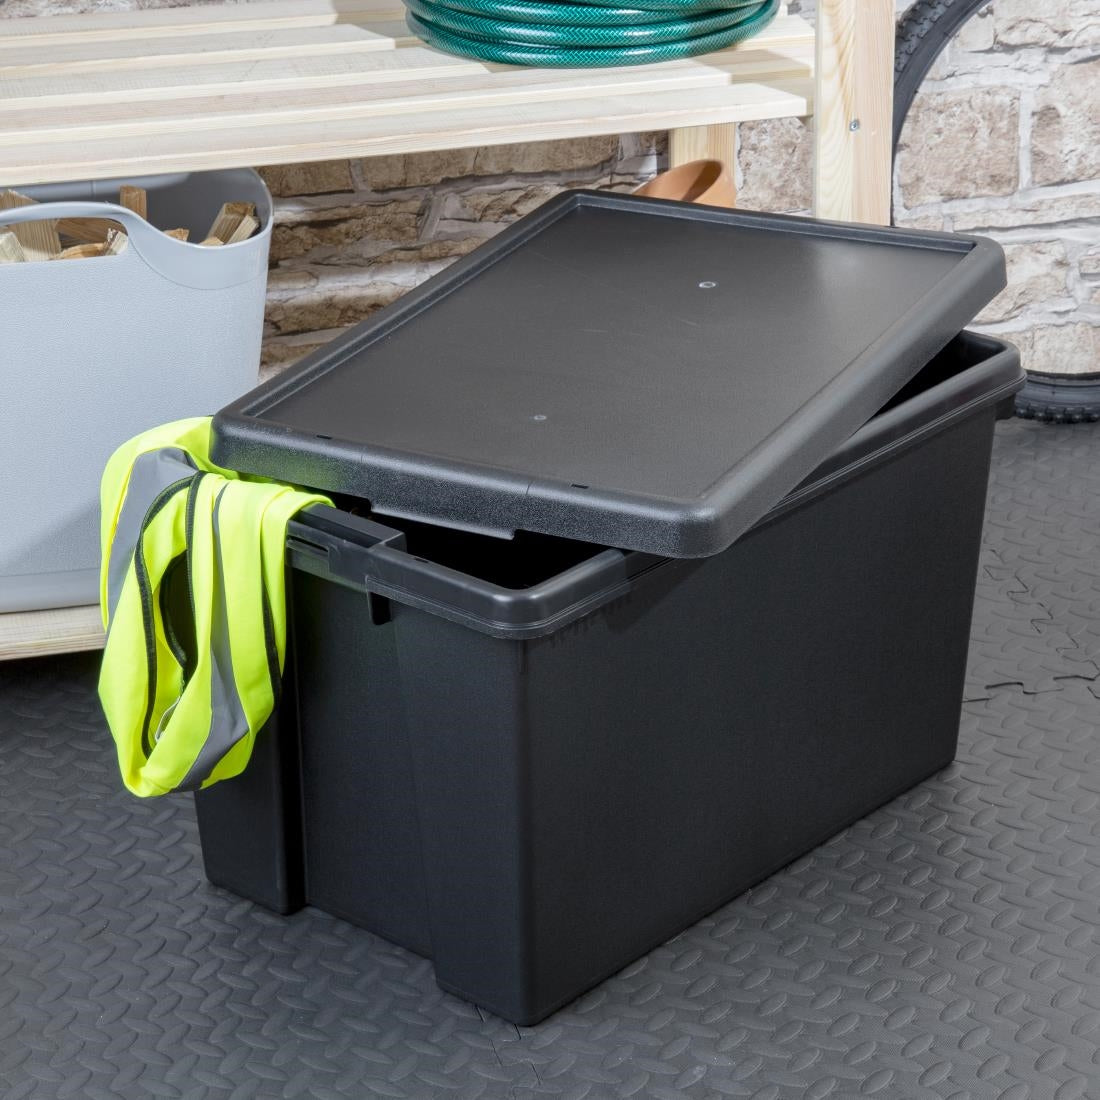 CX094 Wham Bam Recycled Storage Box & Lid Black 62Ltr JD Catering Equipment Solutions Ltd